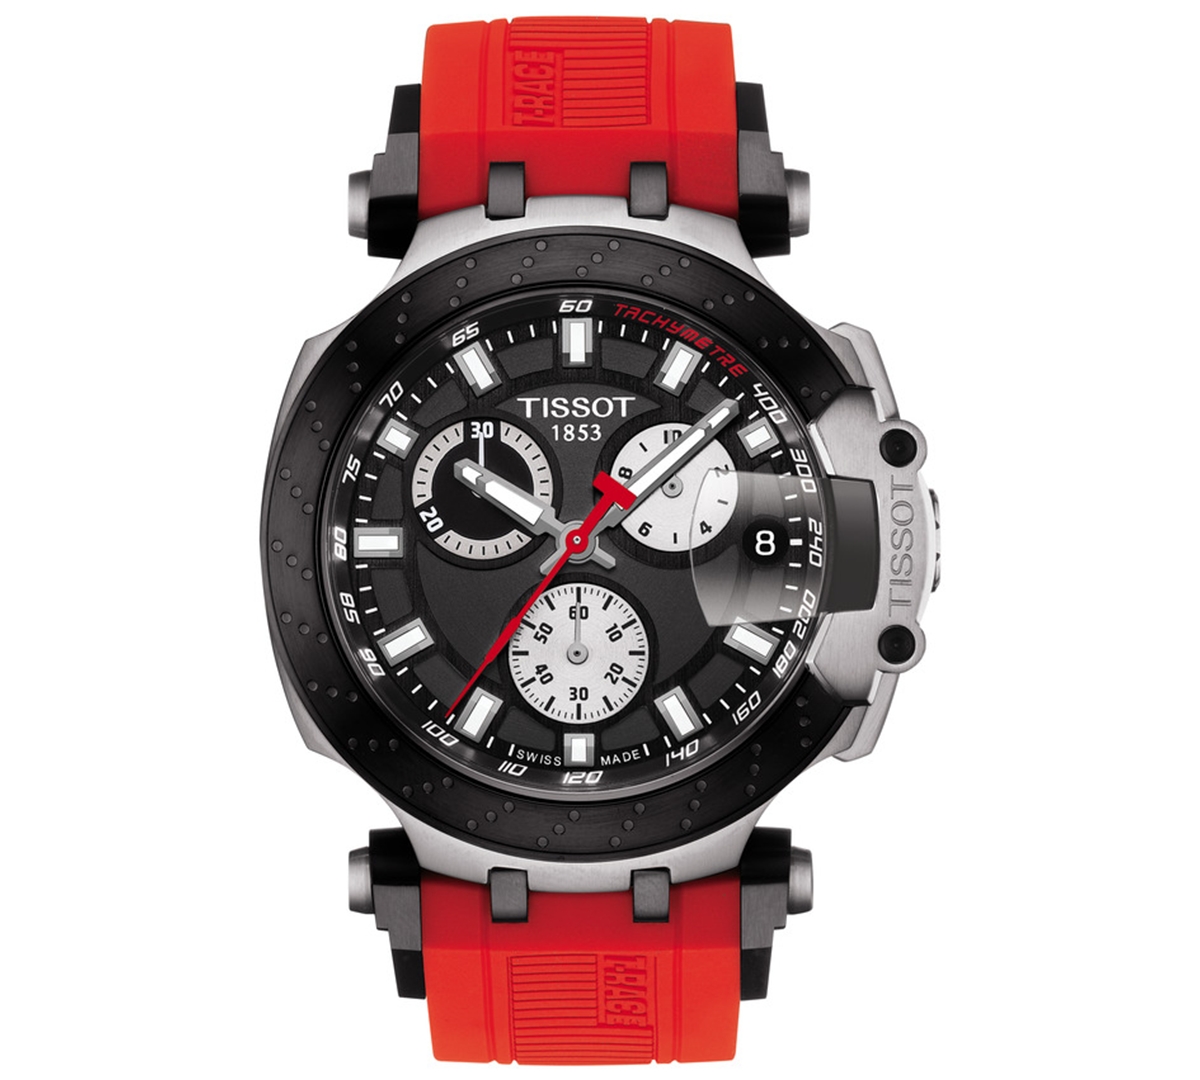 Tissot Men's Swiss Chronograph T-sport T-race Red Silicone Strap Watch 47.6mm